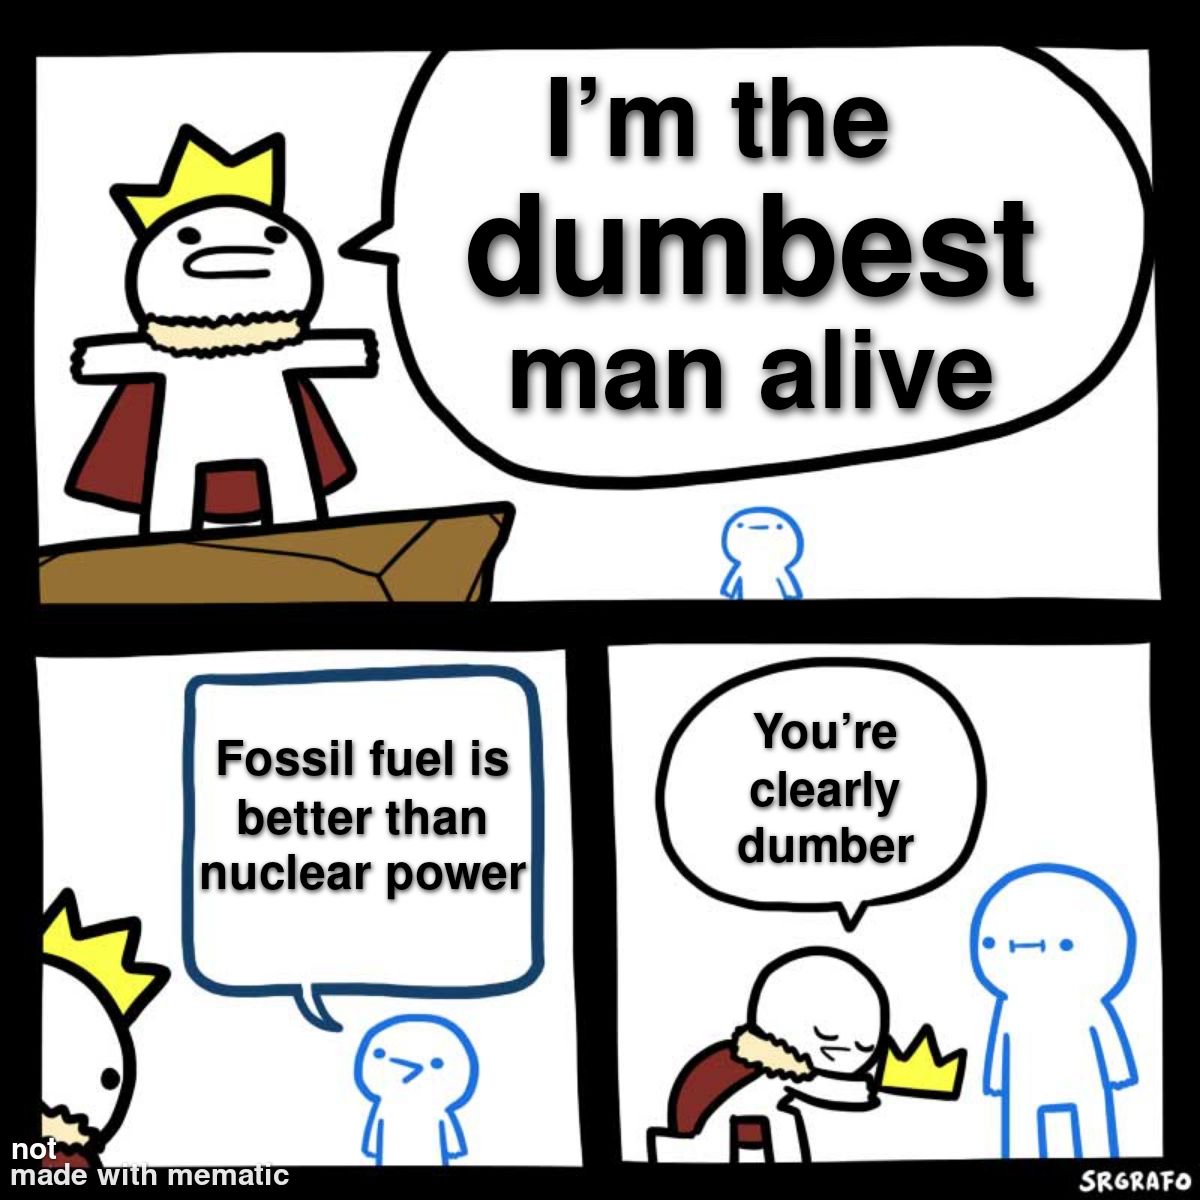 Green>Nuclear>>>>>>Fossil